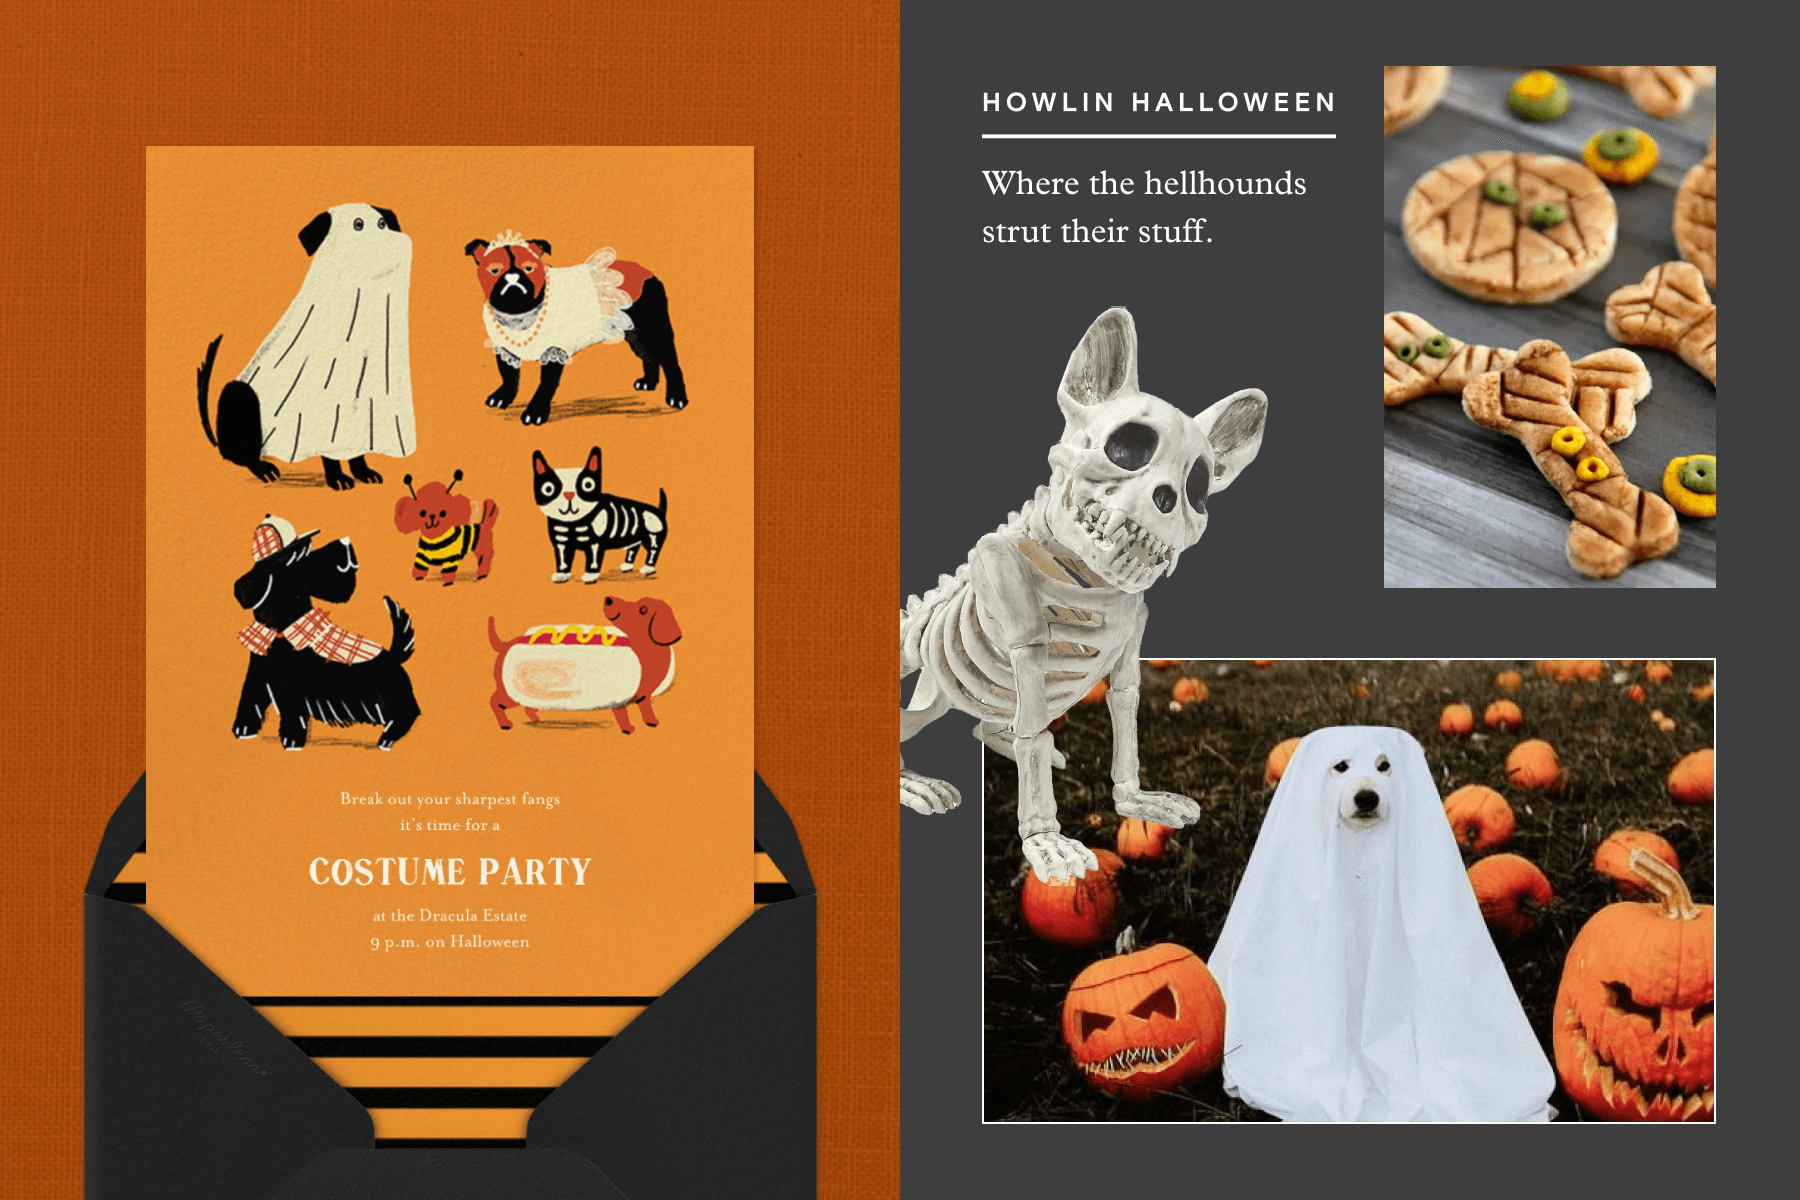 From left: A Halloween invitation with illustrations of dogs in costumes, a skeleton dog decoration, dog treets shaped like bones, a dog covered in a sheet surrounded by jack o’ lanterns.